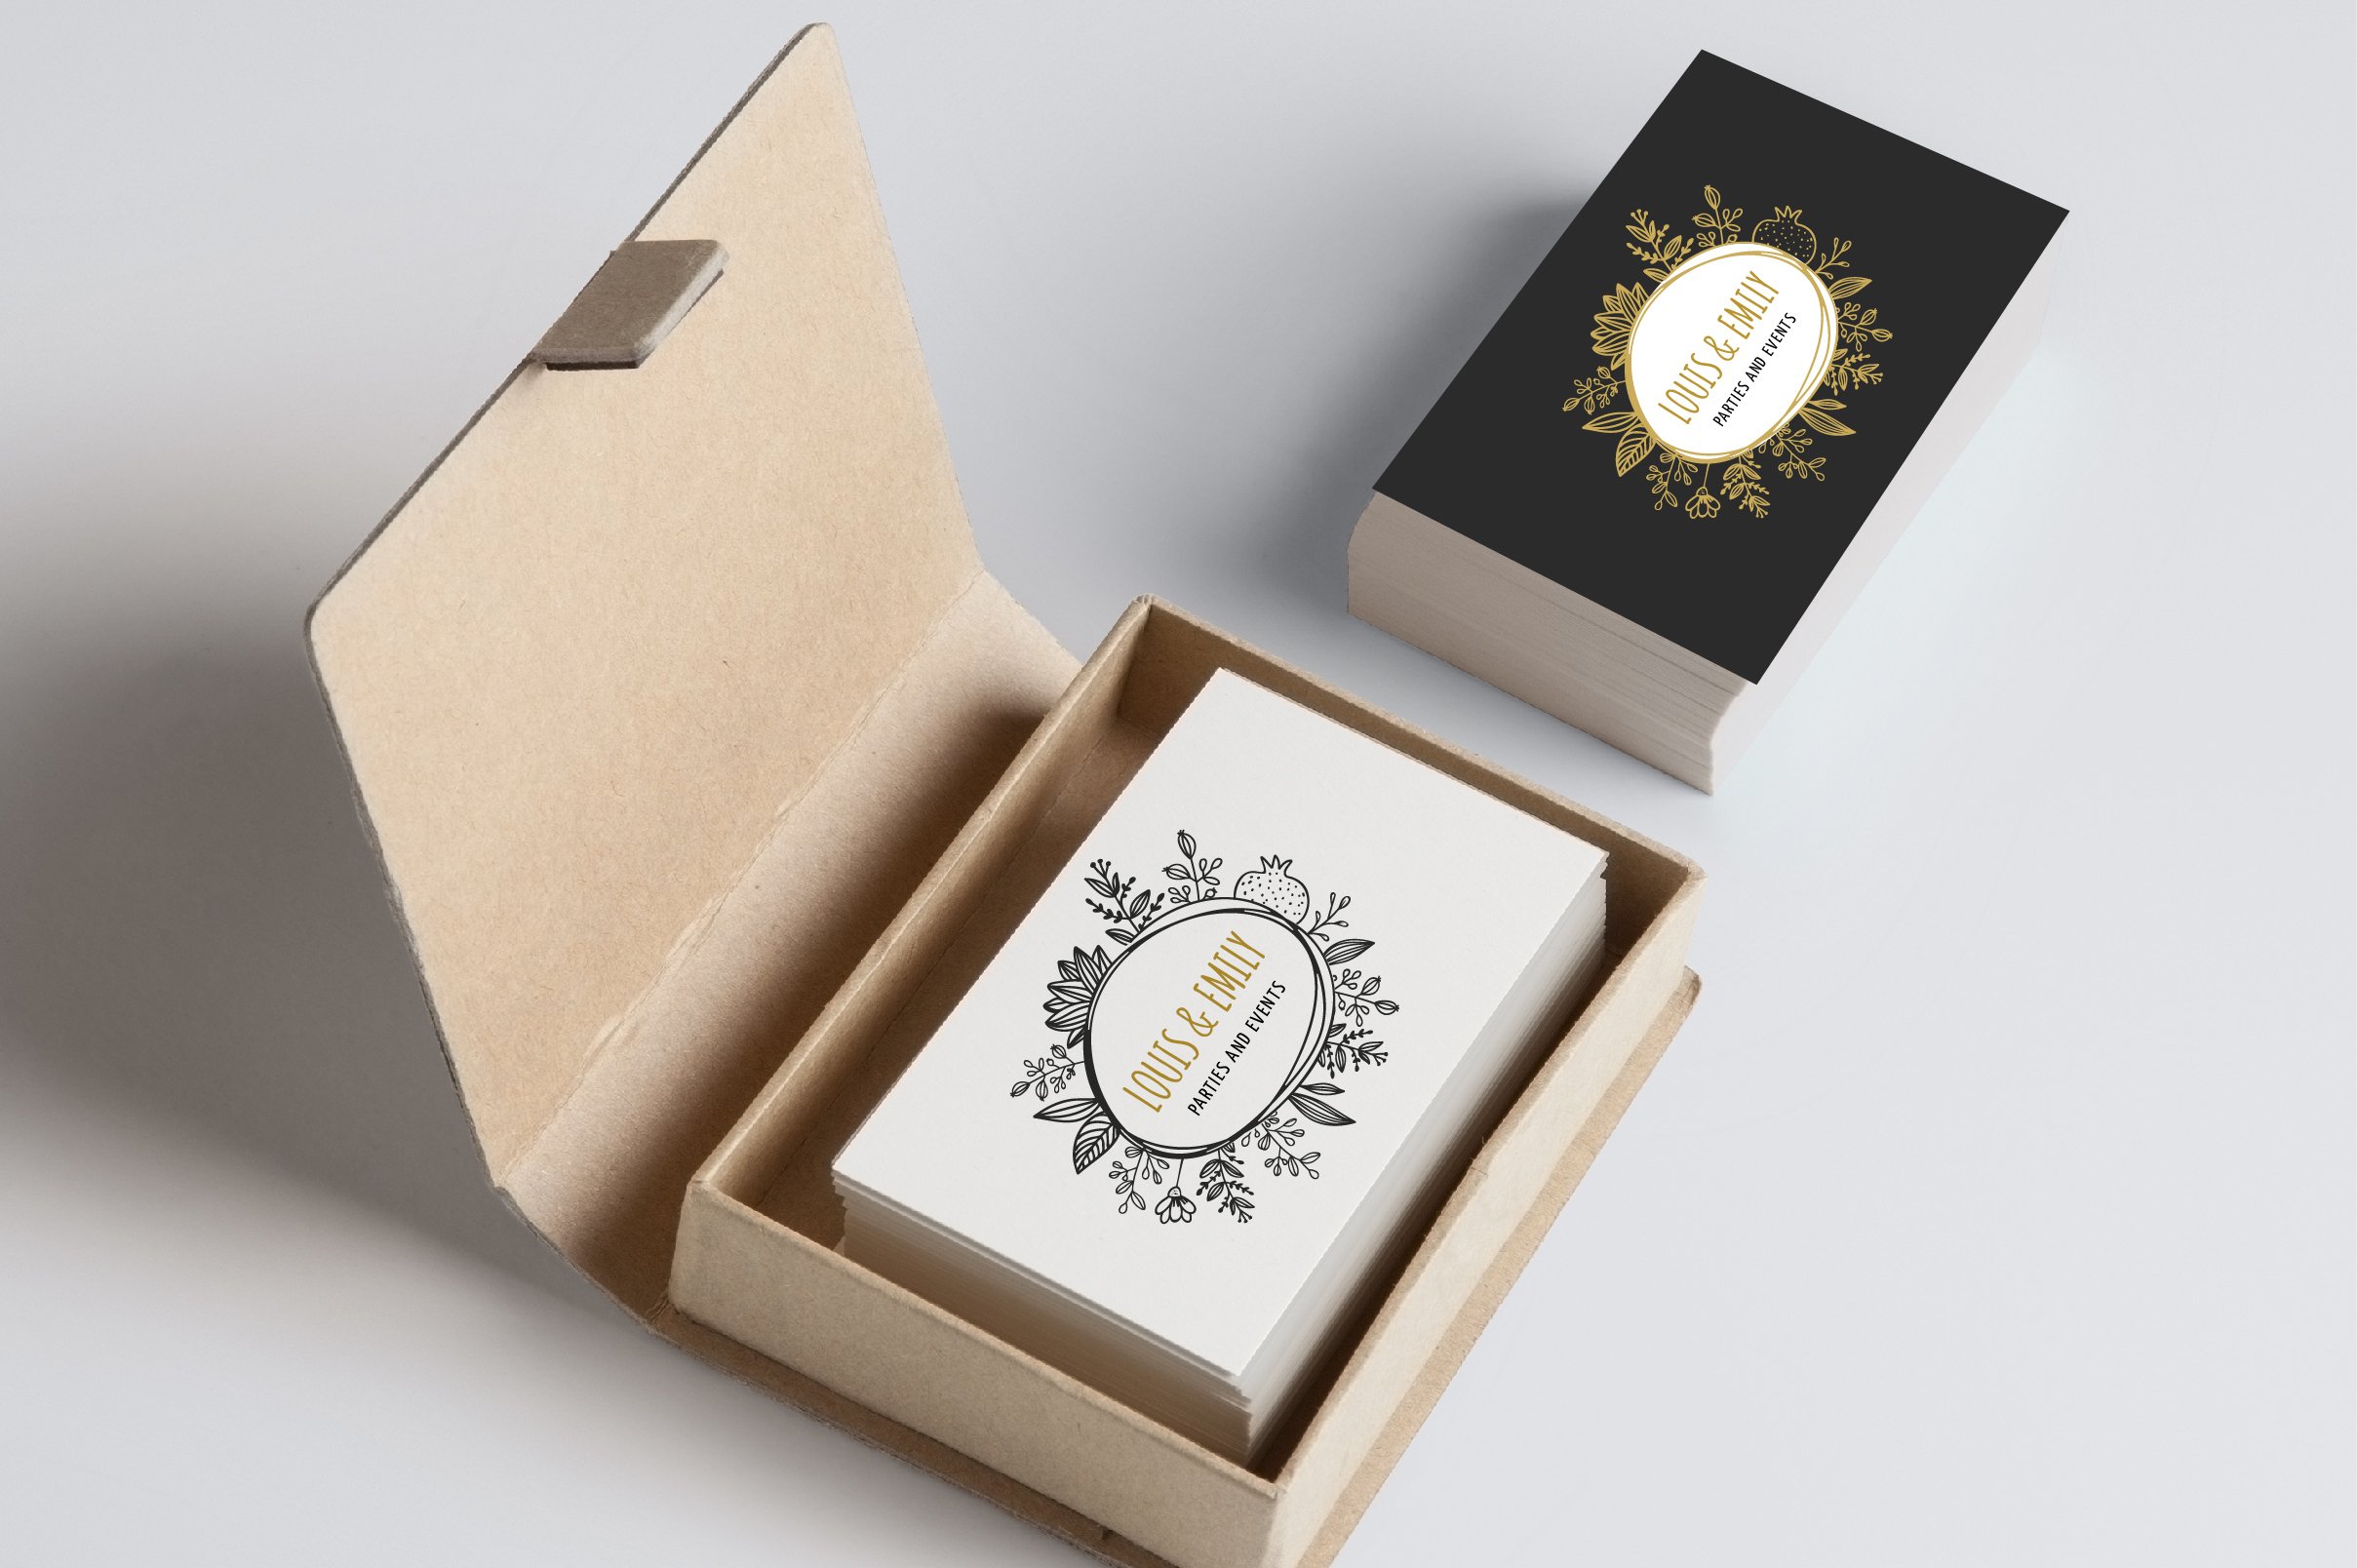 Matte business cards with cool logos.